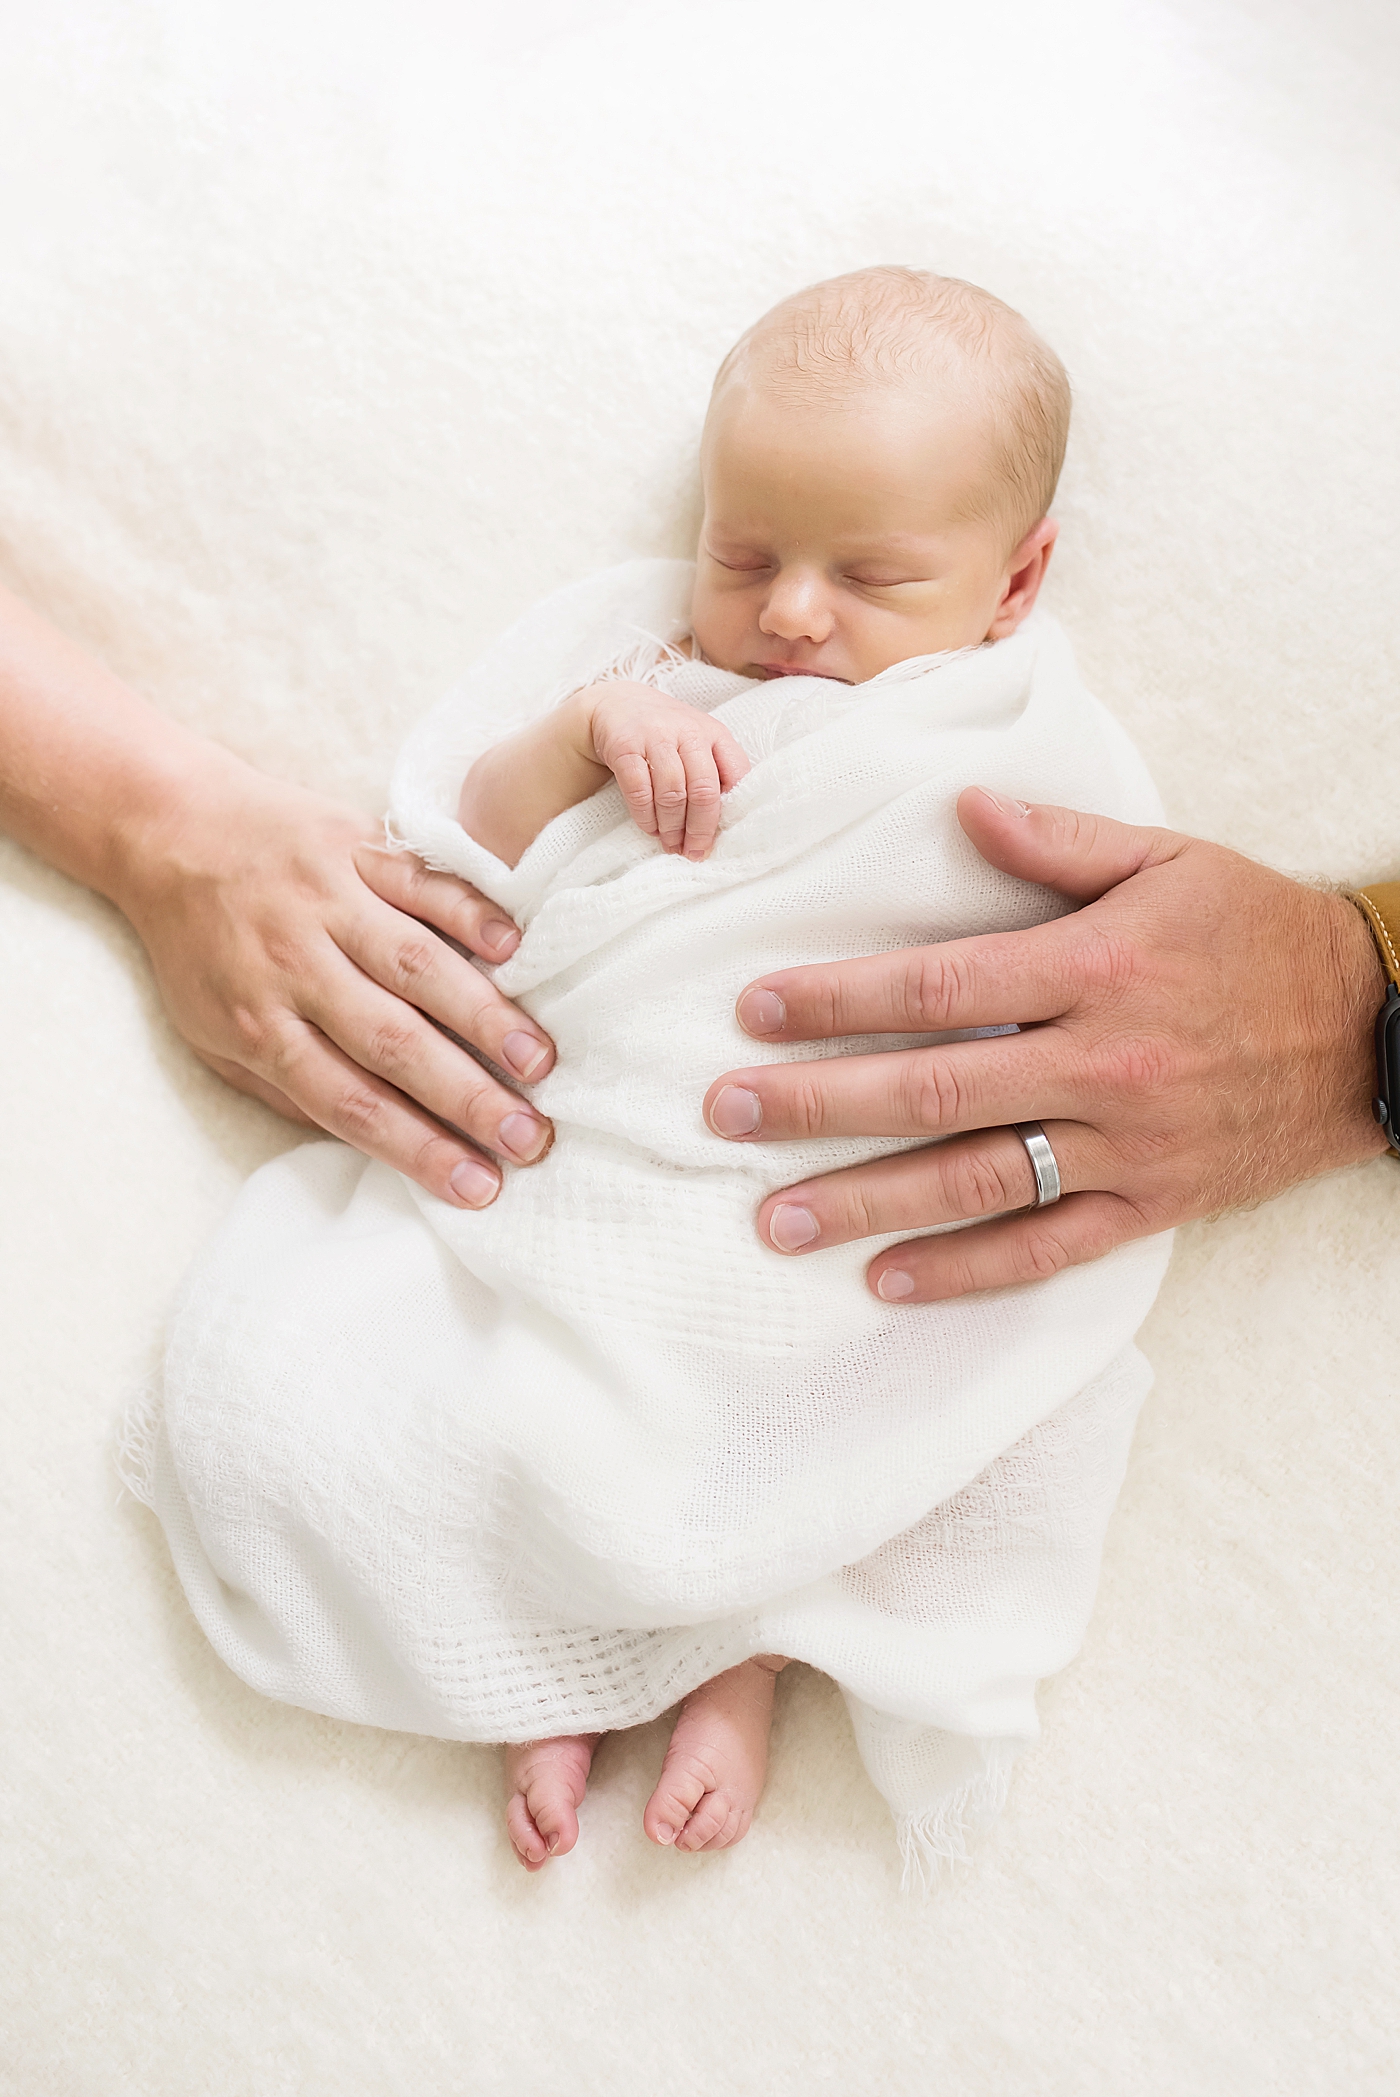 Mom and dad holding newborn baby girl | Photo by Anna Wisjo Photography